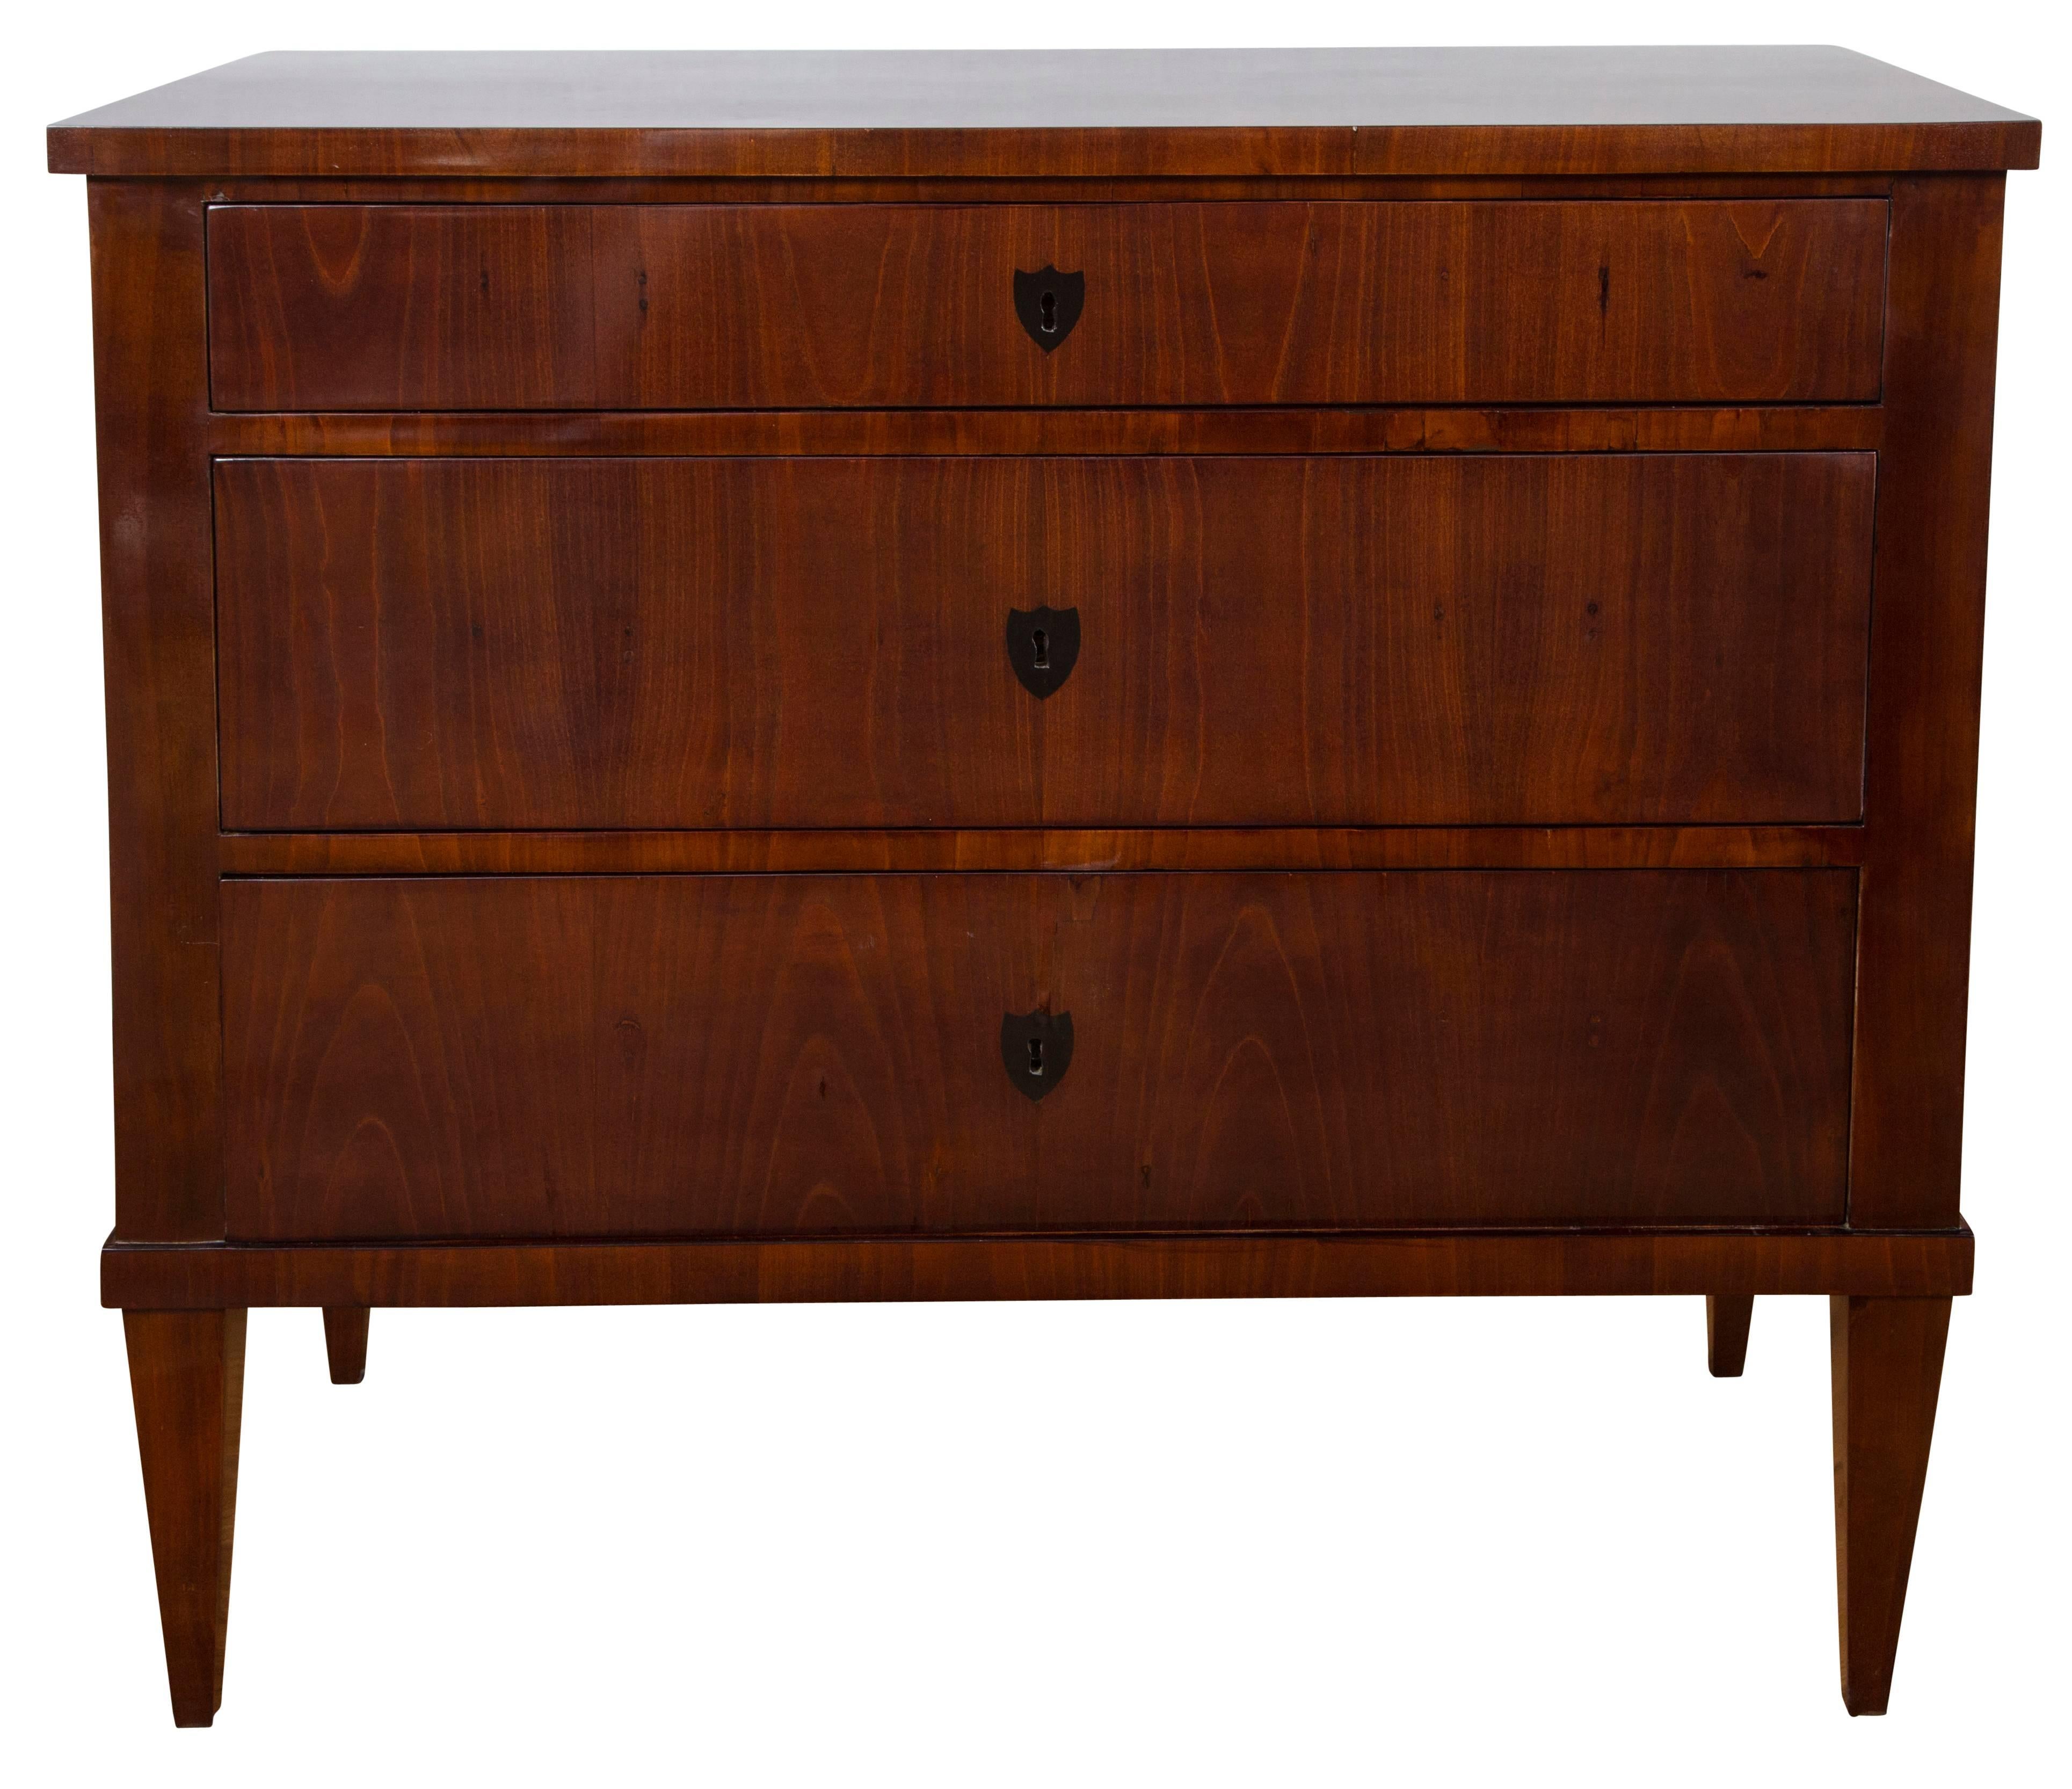 Pair of sleek Biedermeier chests comprised of three drawers finishing on straight and tapered legs in a dark cherrywood, adorned with stained inlaid shield-shaped escutcheons, a working key for each drawer is provided
Origin: Germany
Dating: